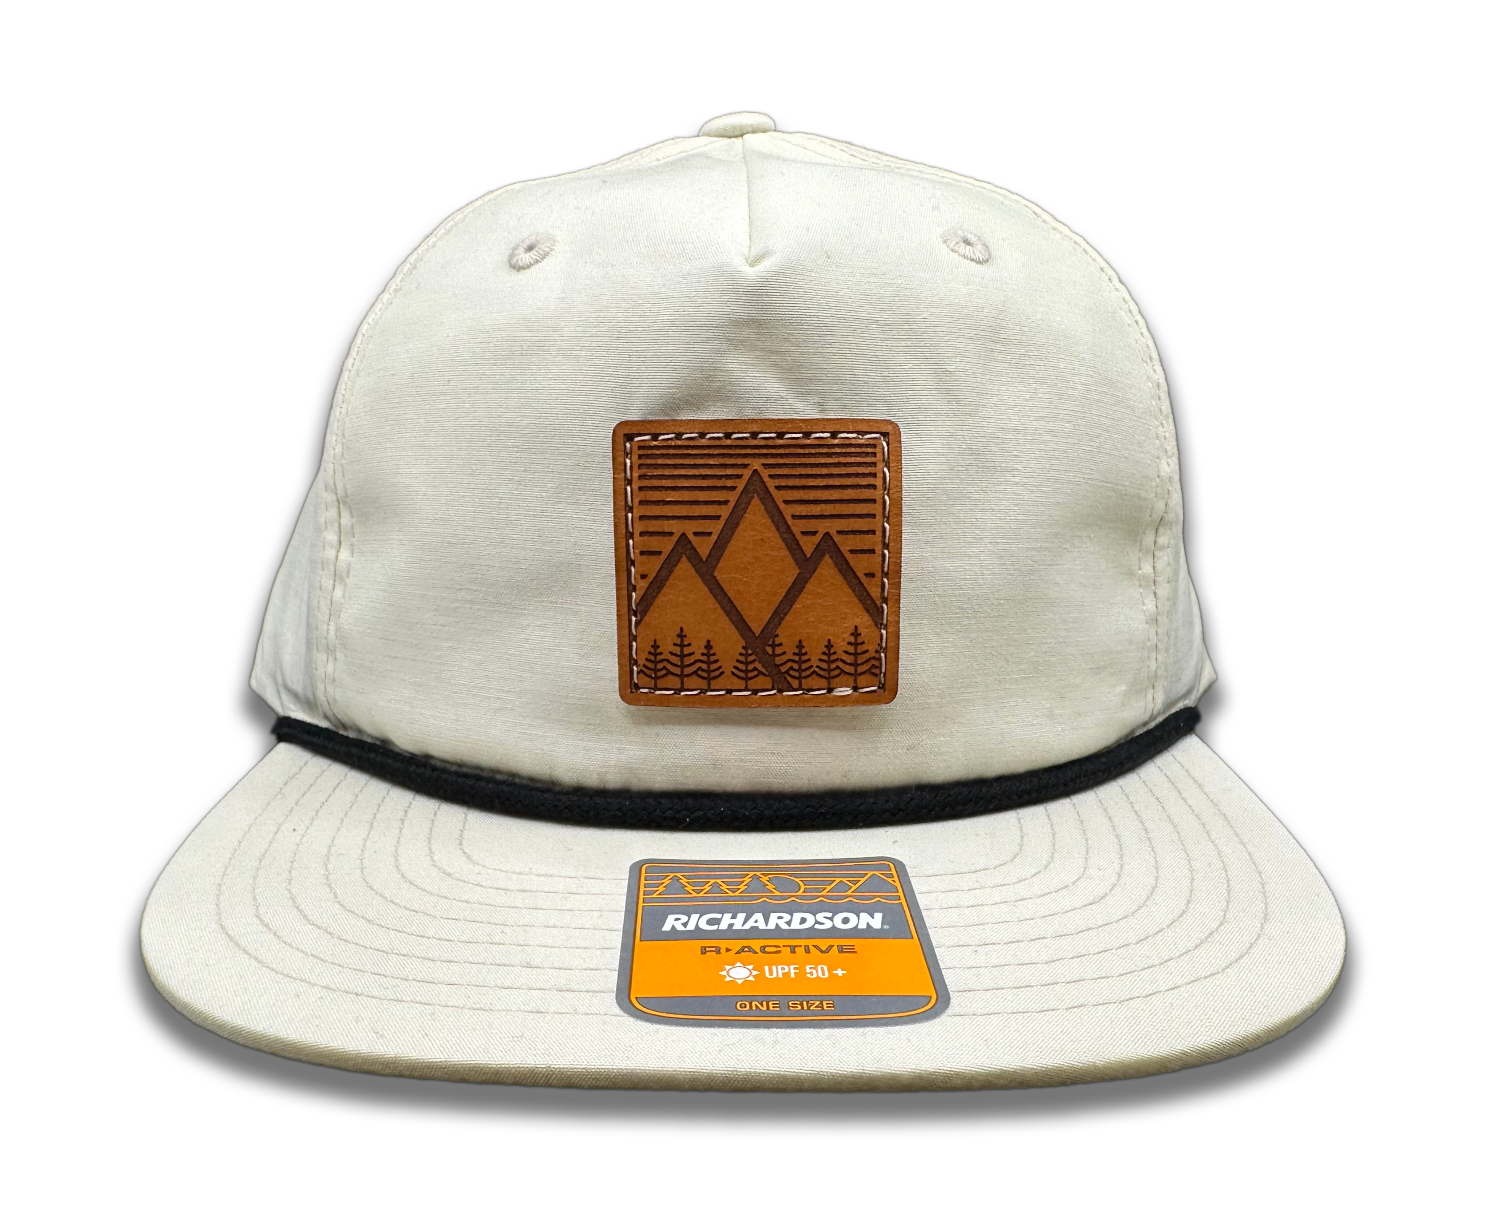 Stay cool and stylish with the Birch Richardson 256 Rope Umpqua Hat. Featuring a flatbill and lightweight material, this low profile SnapBack cap is perfect for any outdoor adventure. The real leather patch with our mountain west design adds a touch of rugged charm to this must-have accessory.